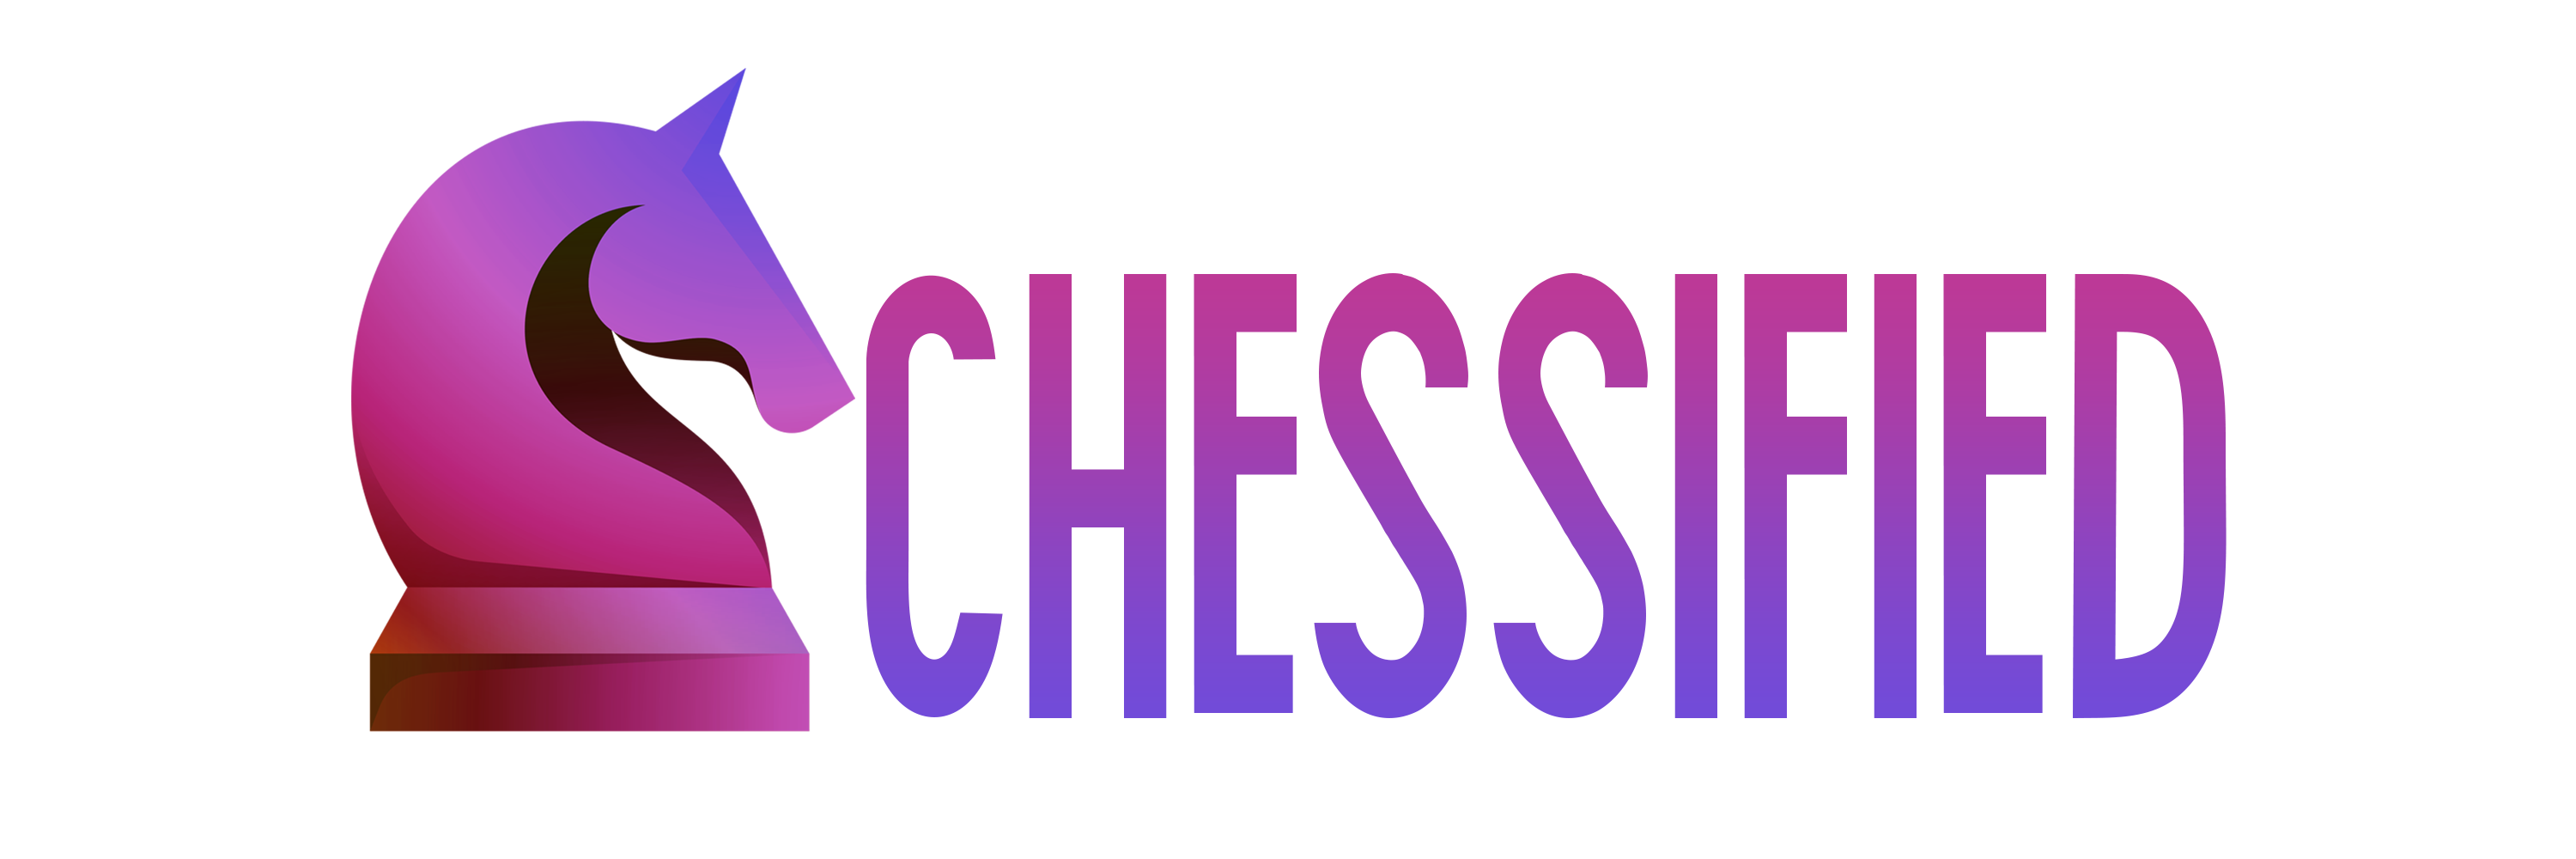 Chessified